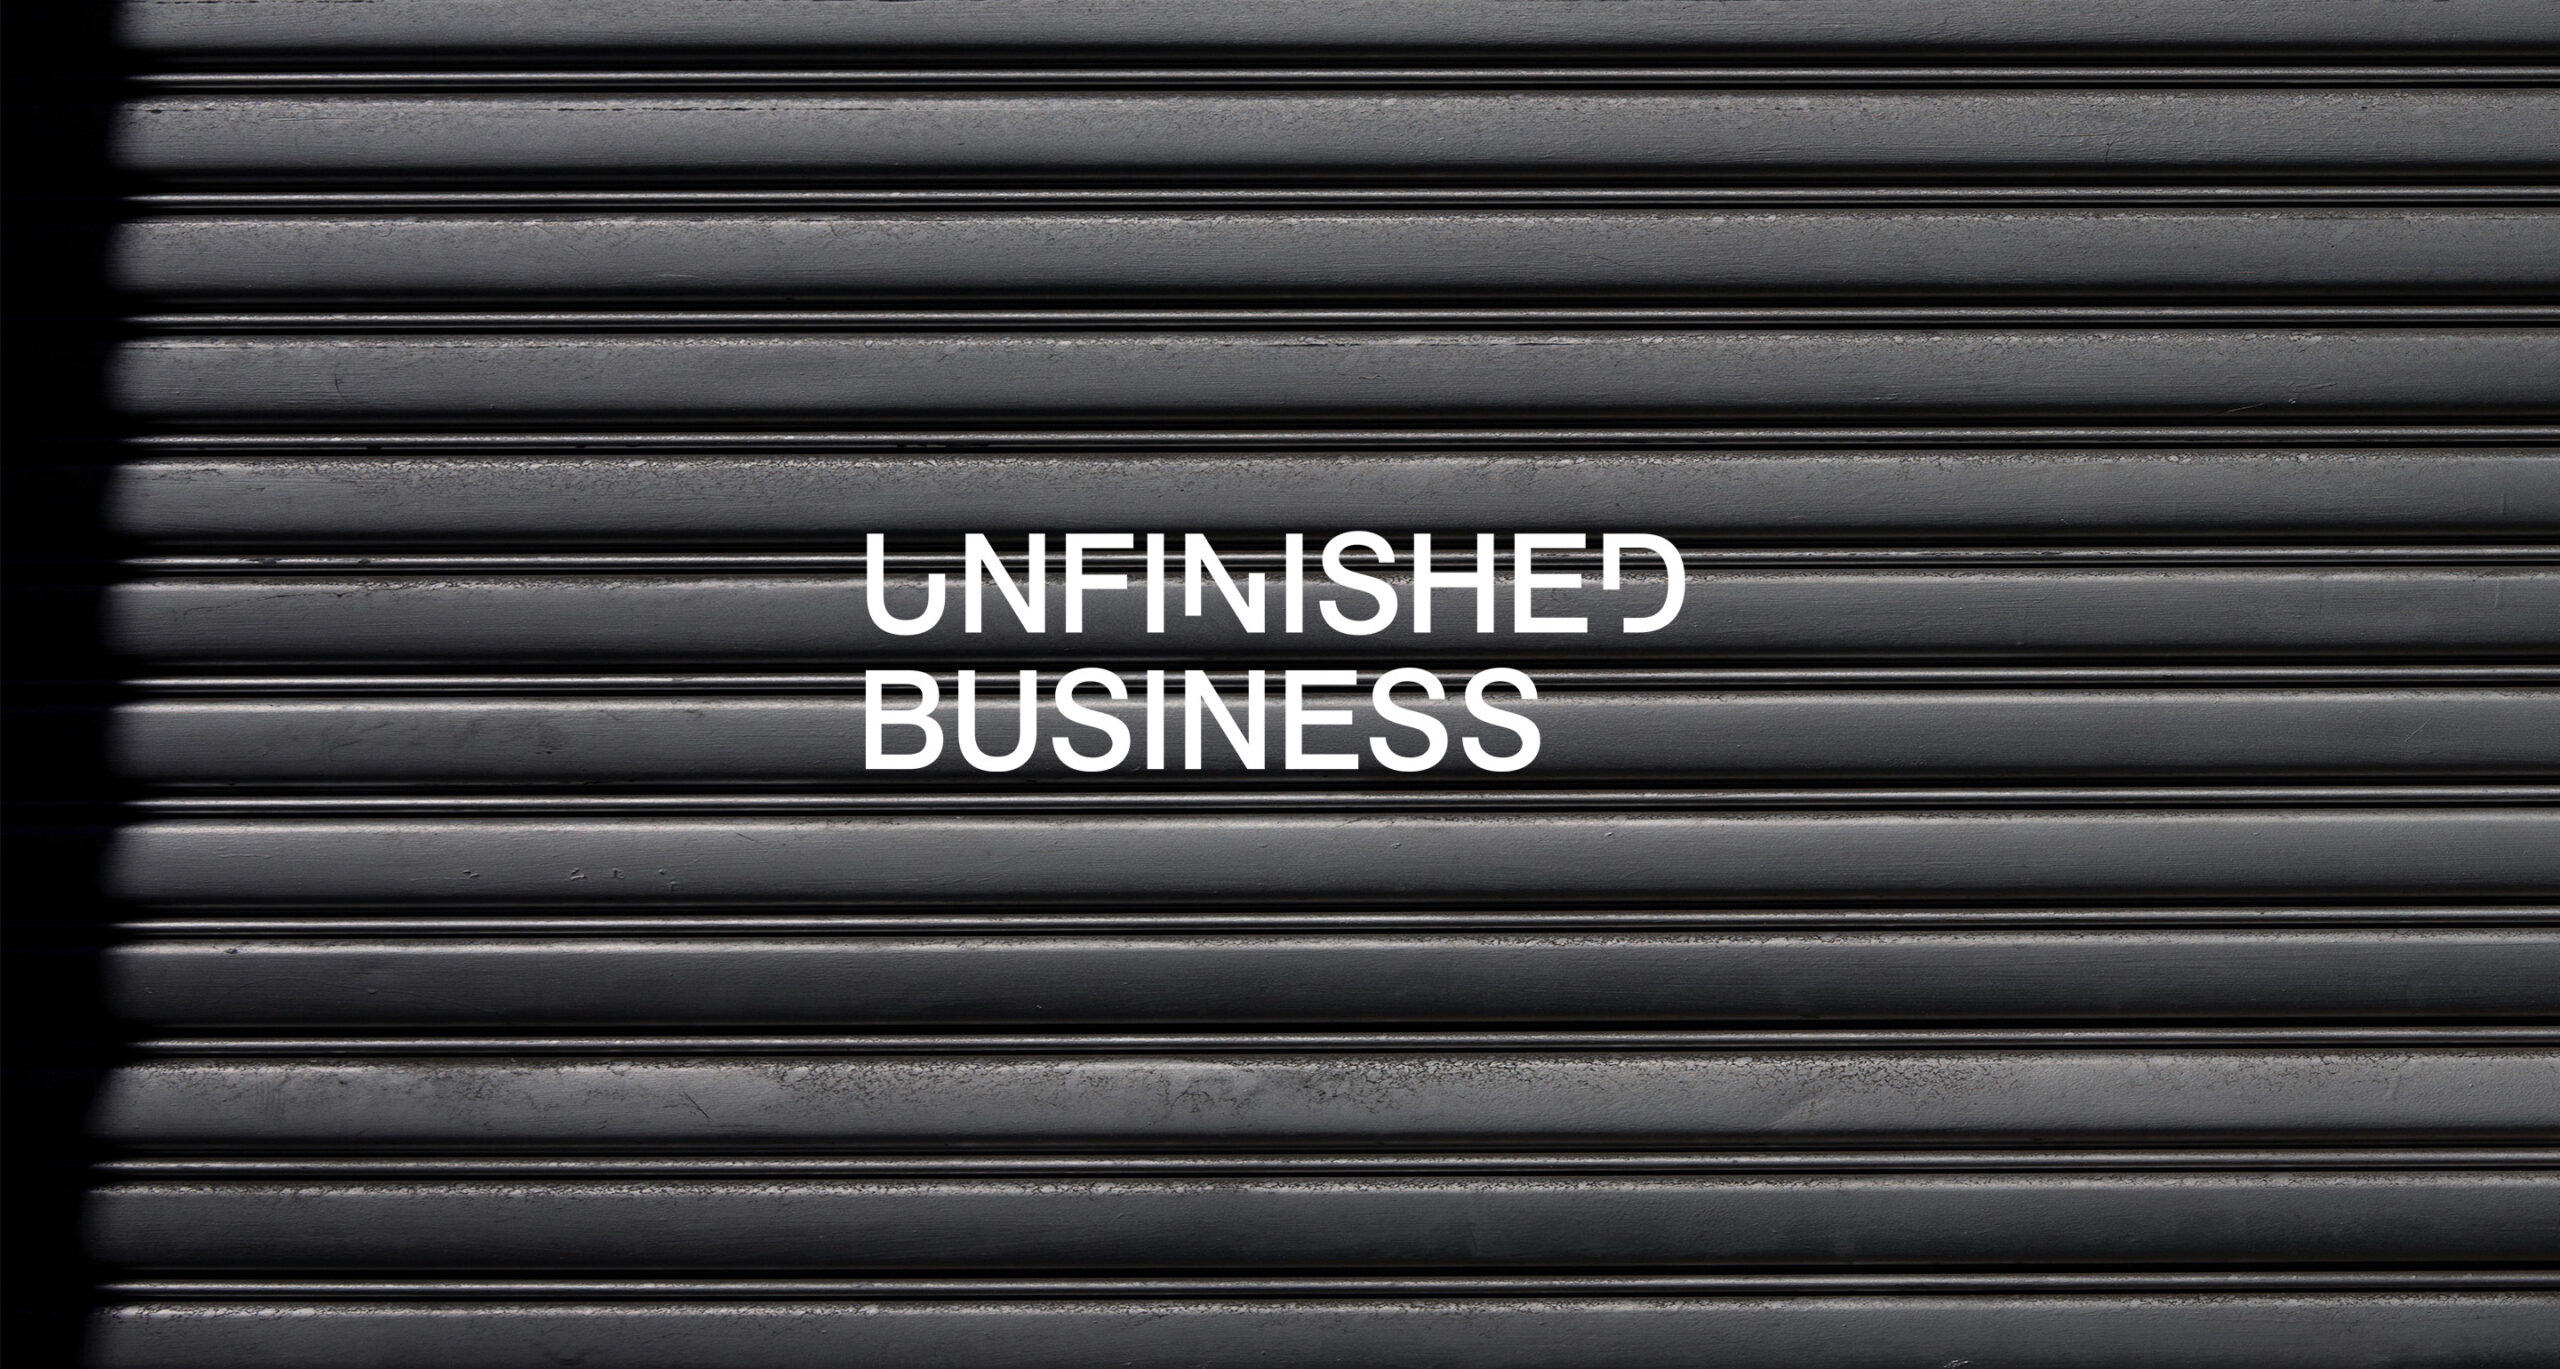 us_unfinished_business_2880x1540